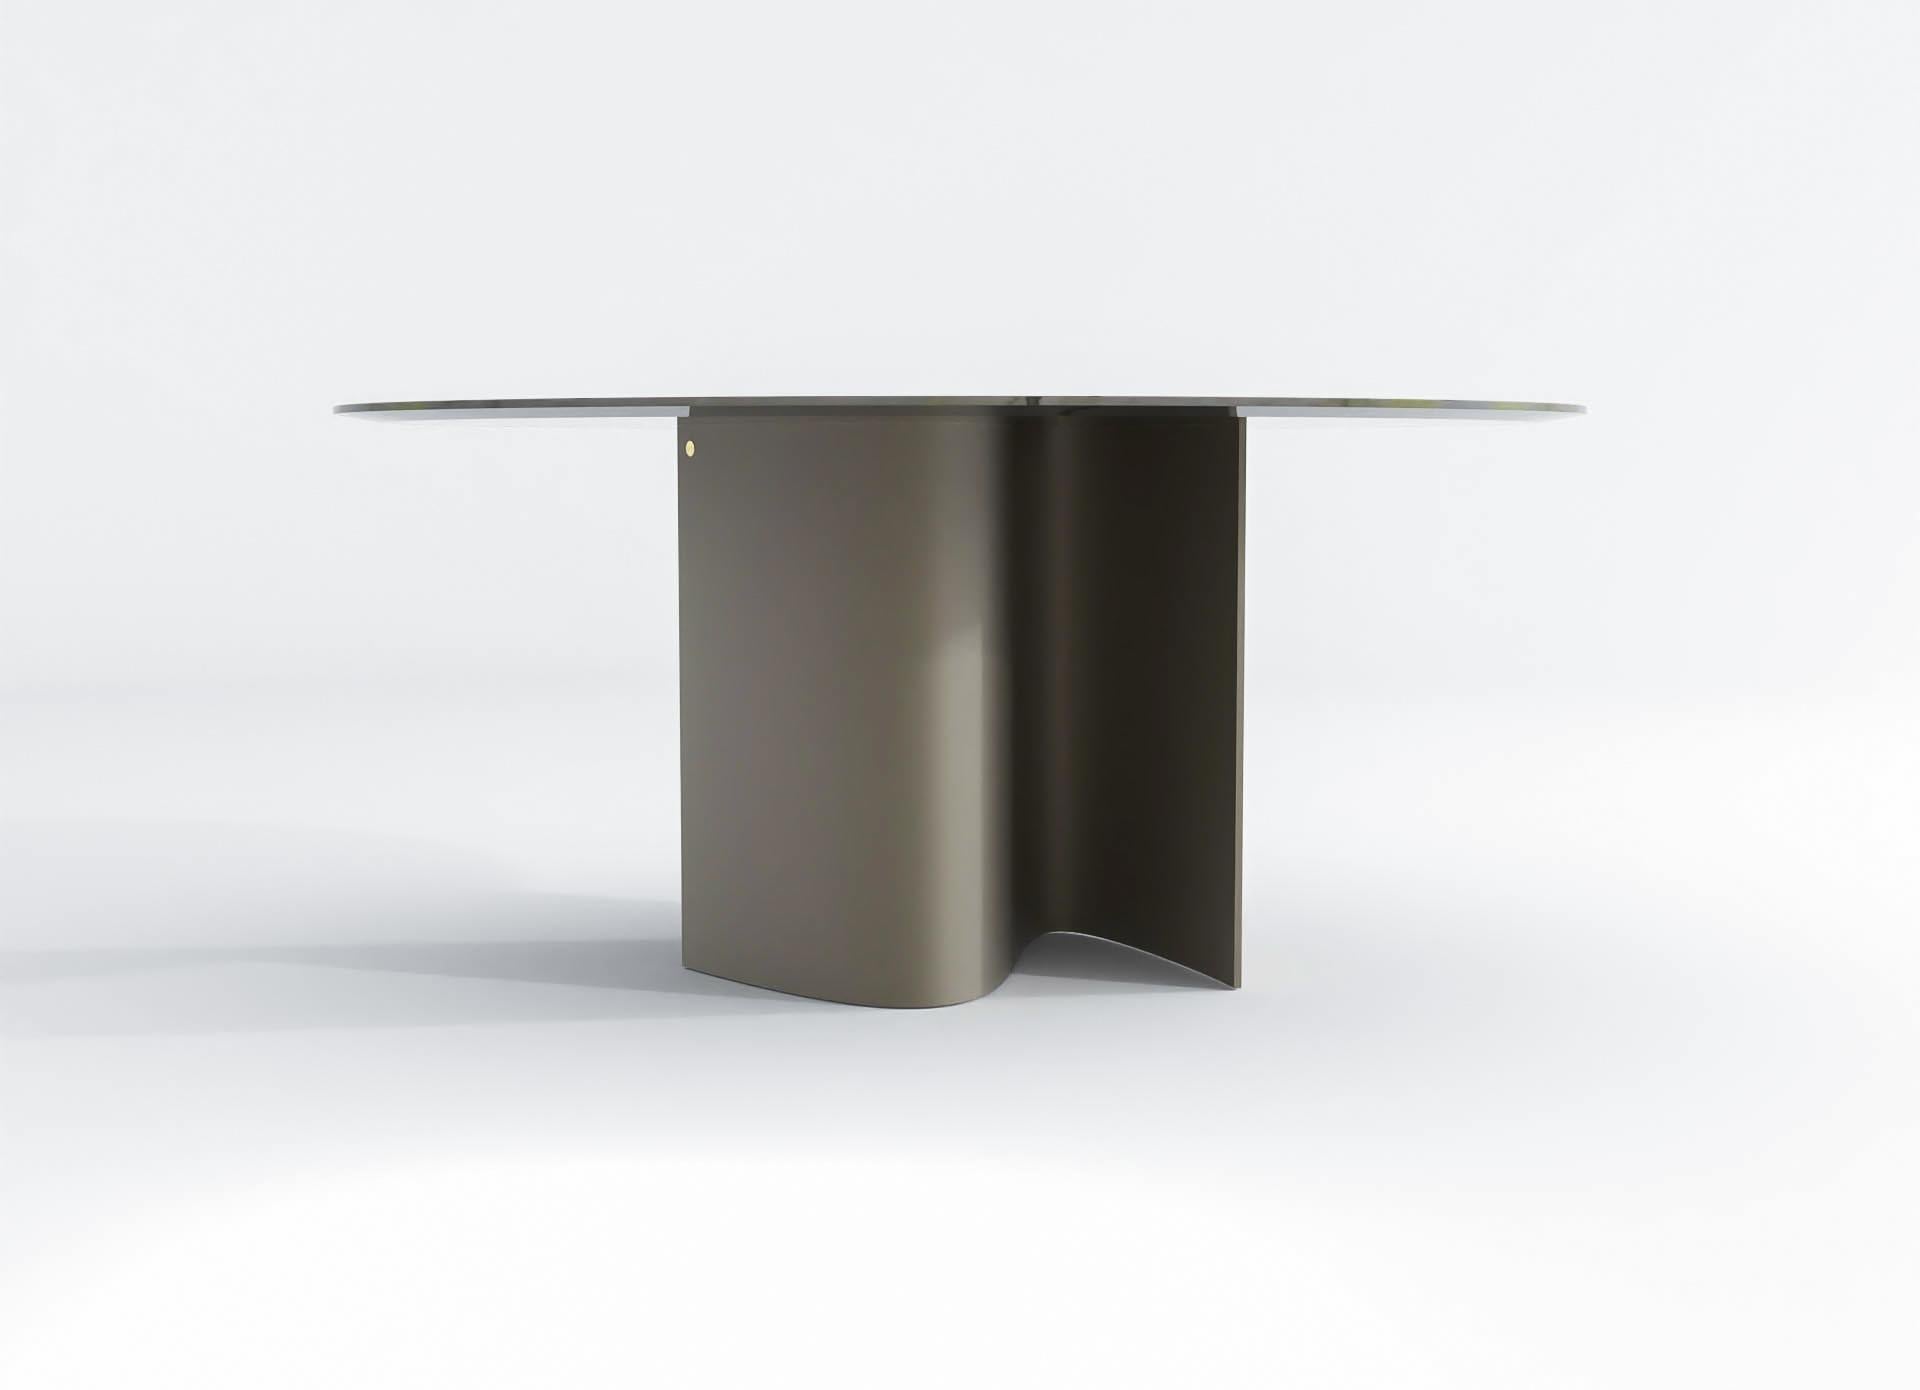 barh wave table is designed with a contrasting design language. The wavy base supporting a rigid and static table top creates a powerful piece of furniture.
The metallic aspect of the wavy base plays with light and shadows, feeding curious minds.